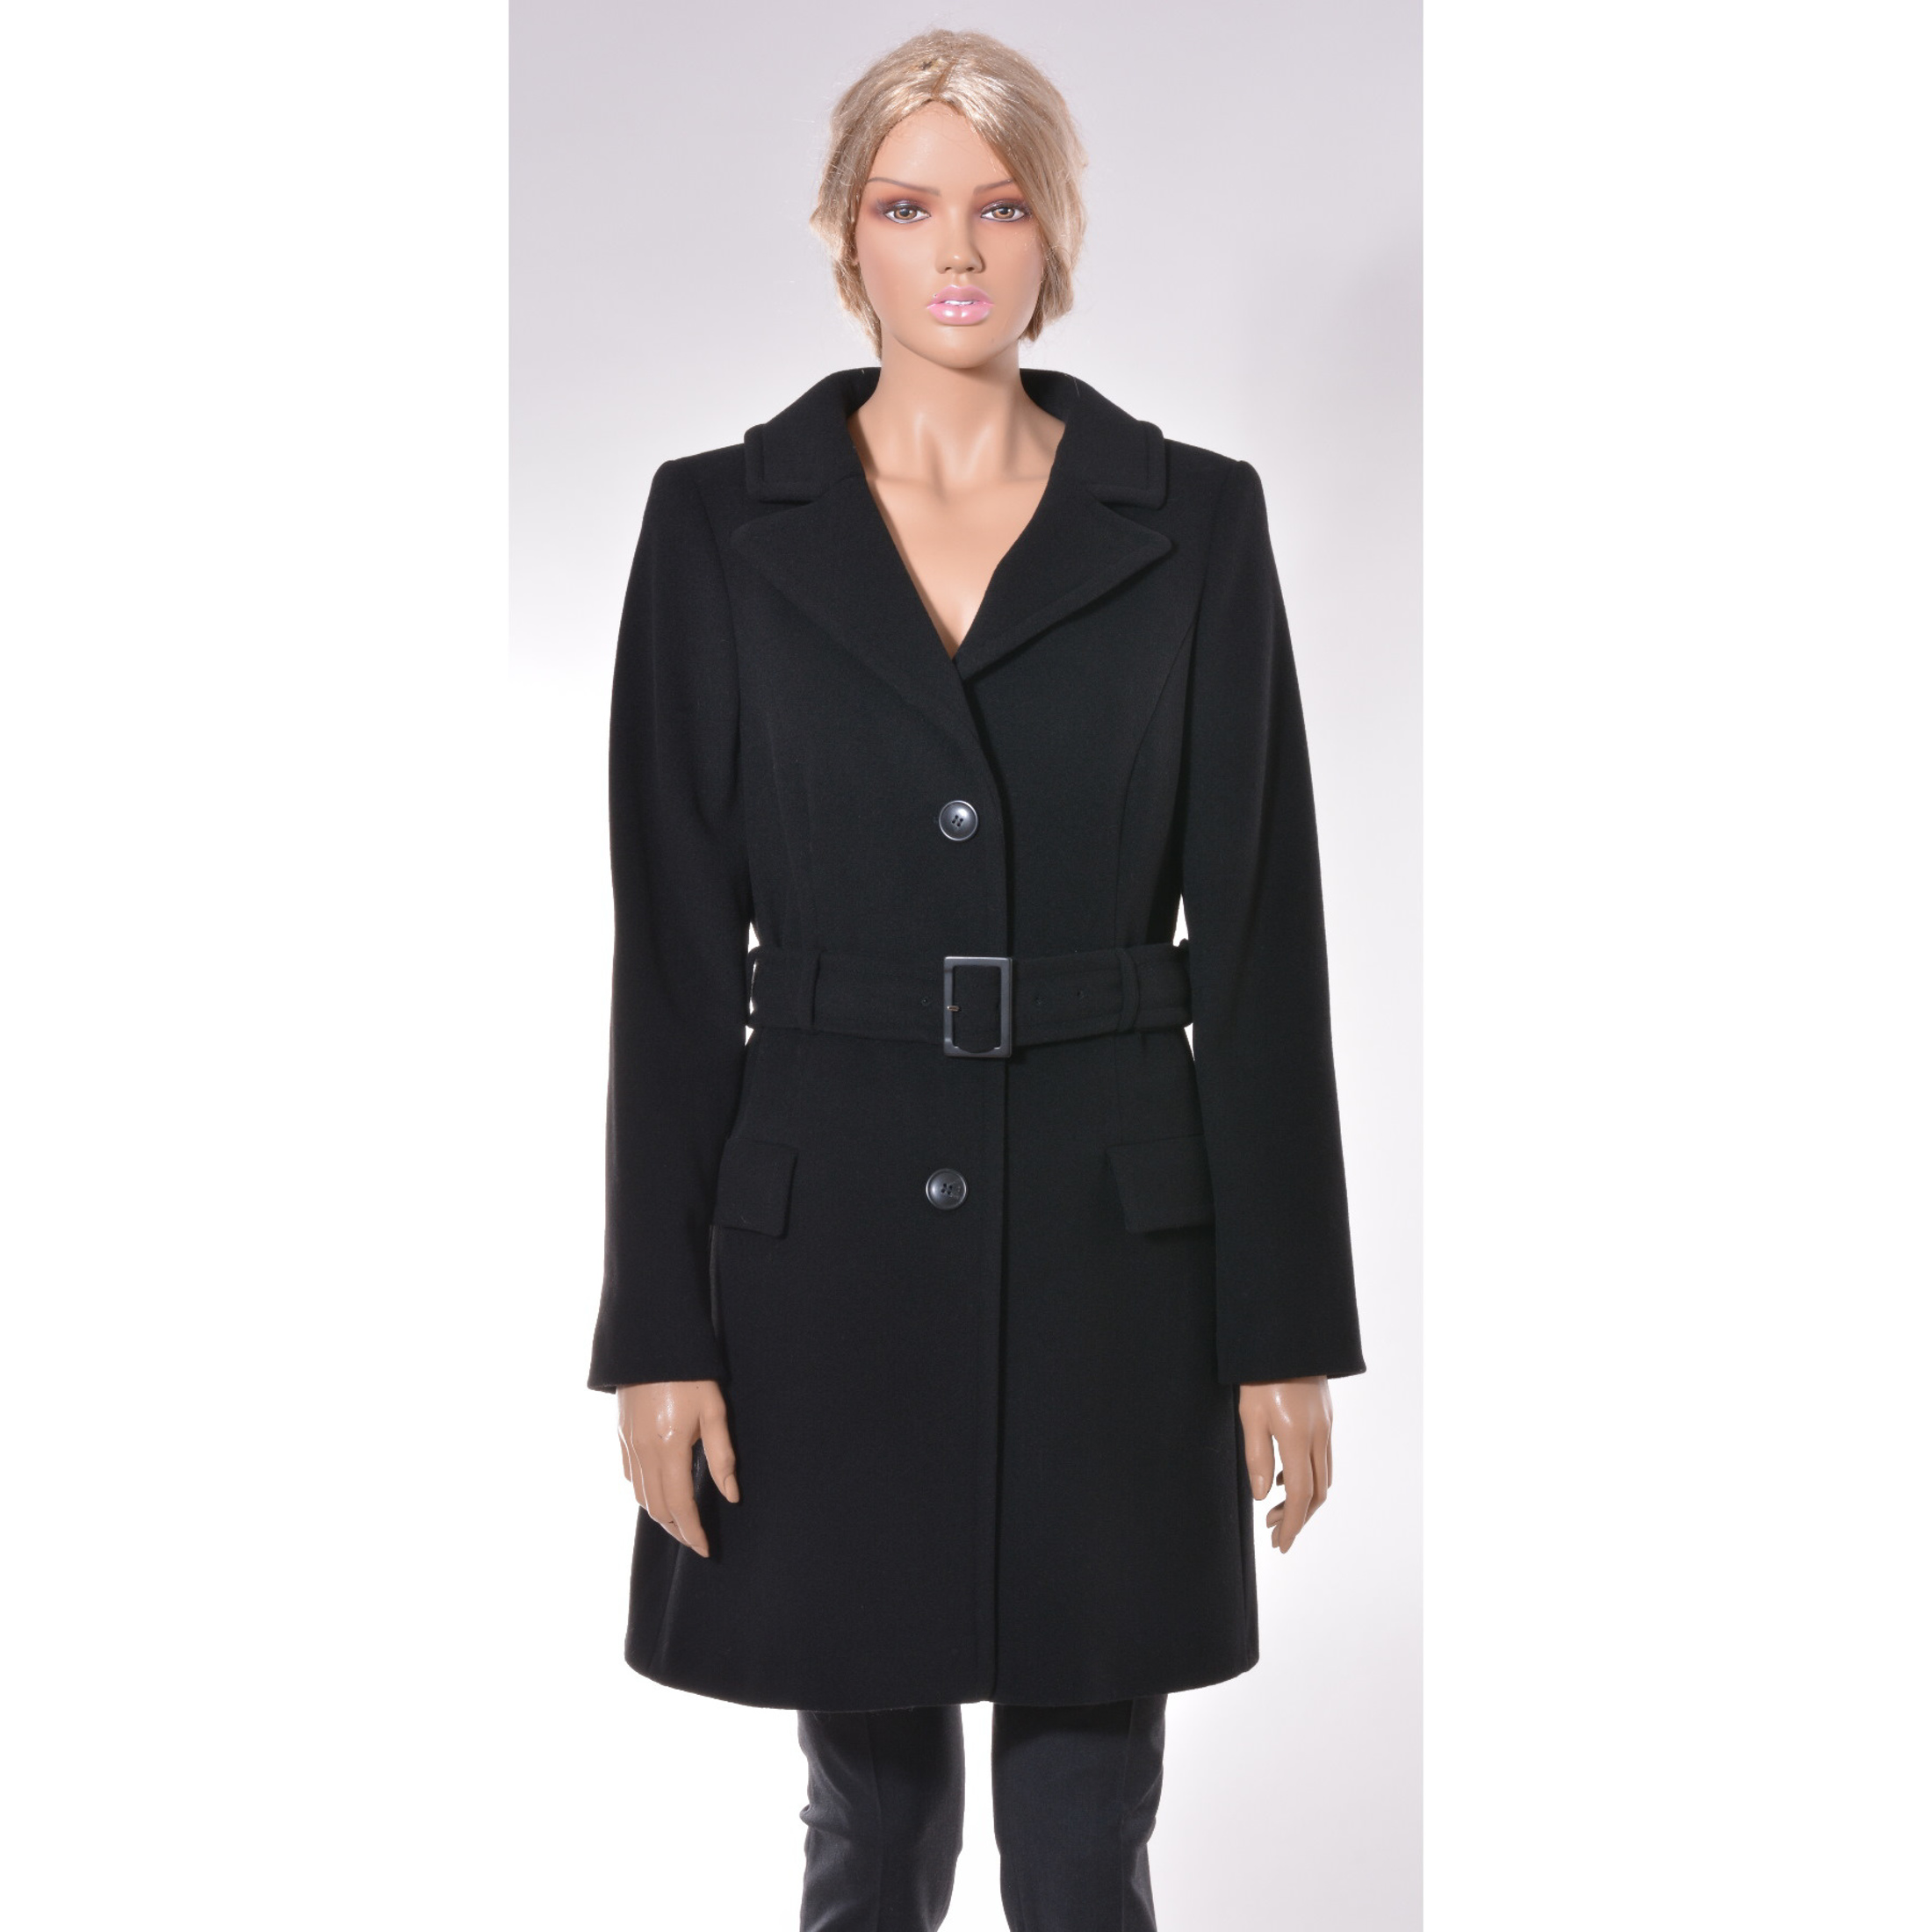 slim coat, high colar, fastening with 3 button